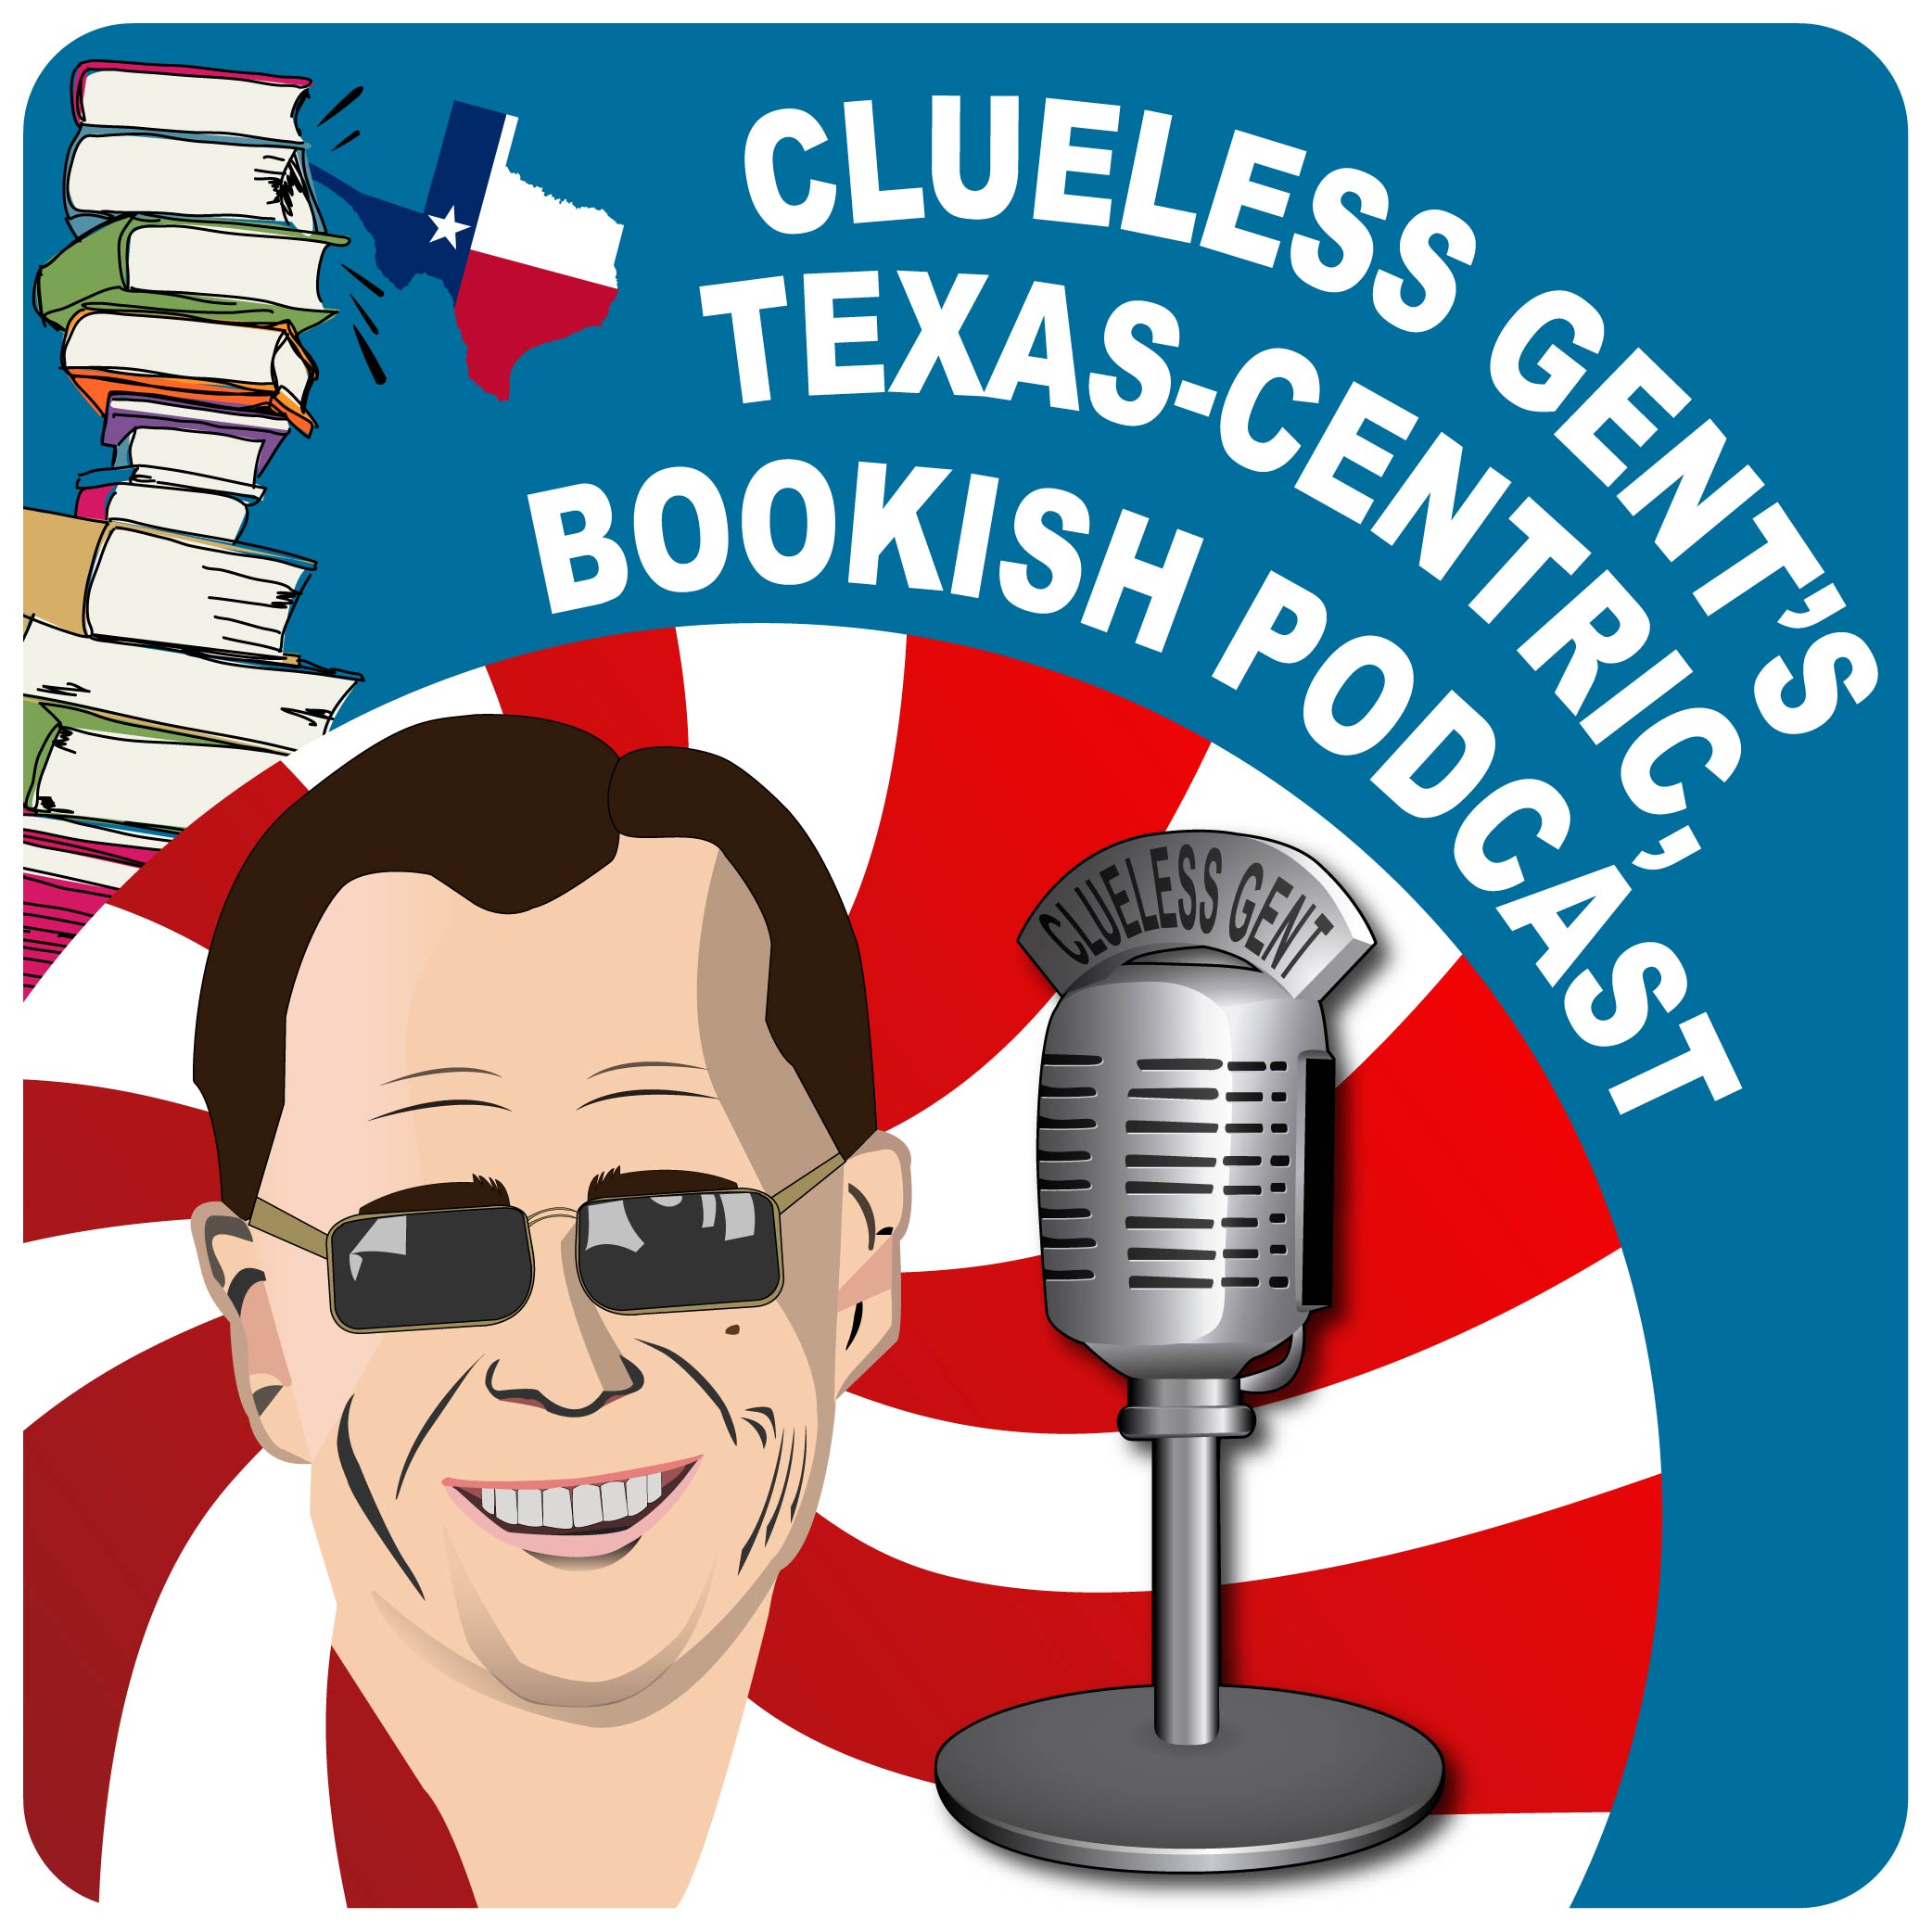 Clueless Gent's Texas-Centric, Bookish Podcast